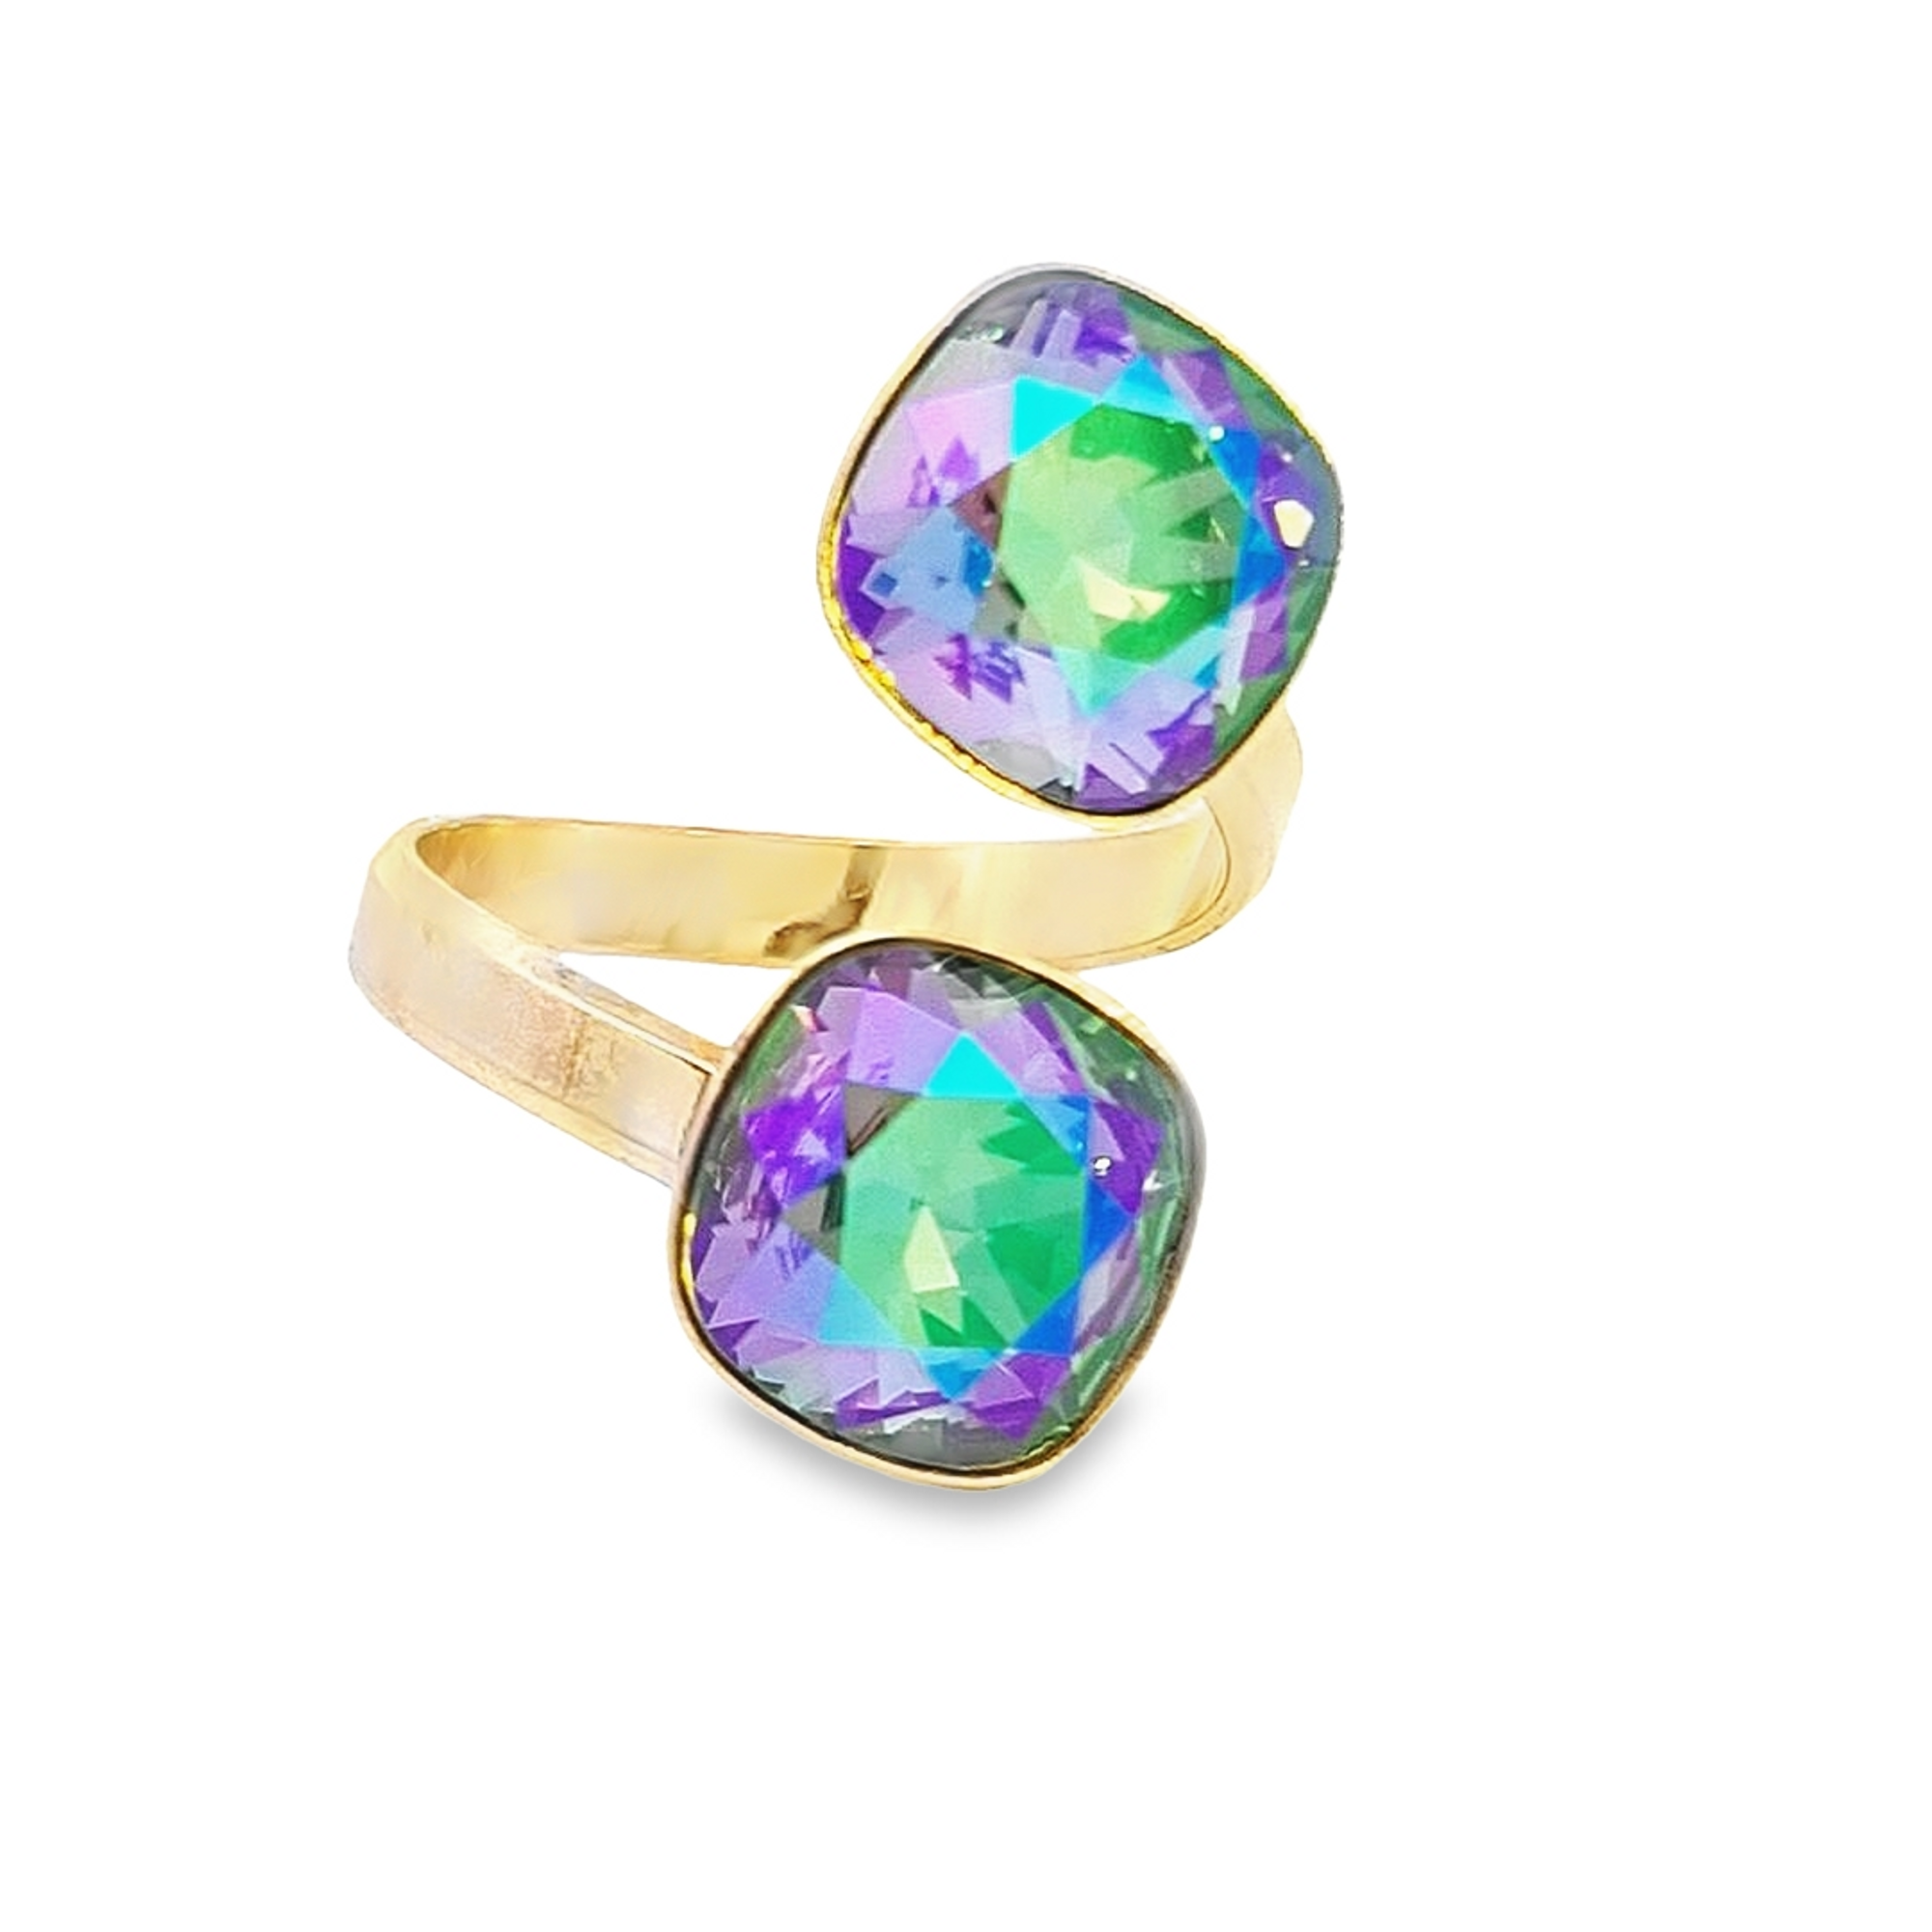 Elegant Lumière Haven Ring with 24k Gold Plating and Paradise Shine Cushion Crystals, Front View - Magpie Gems Ireland